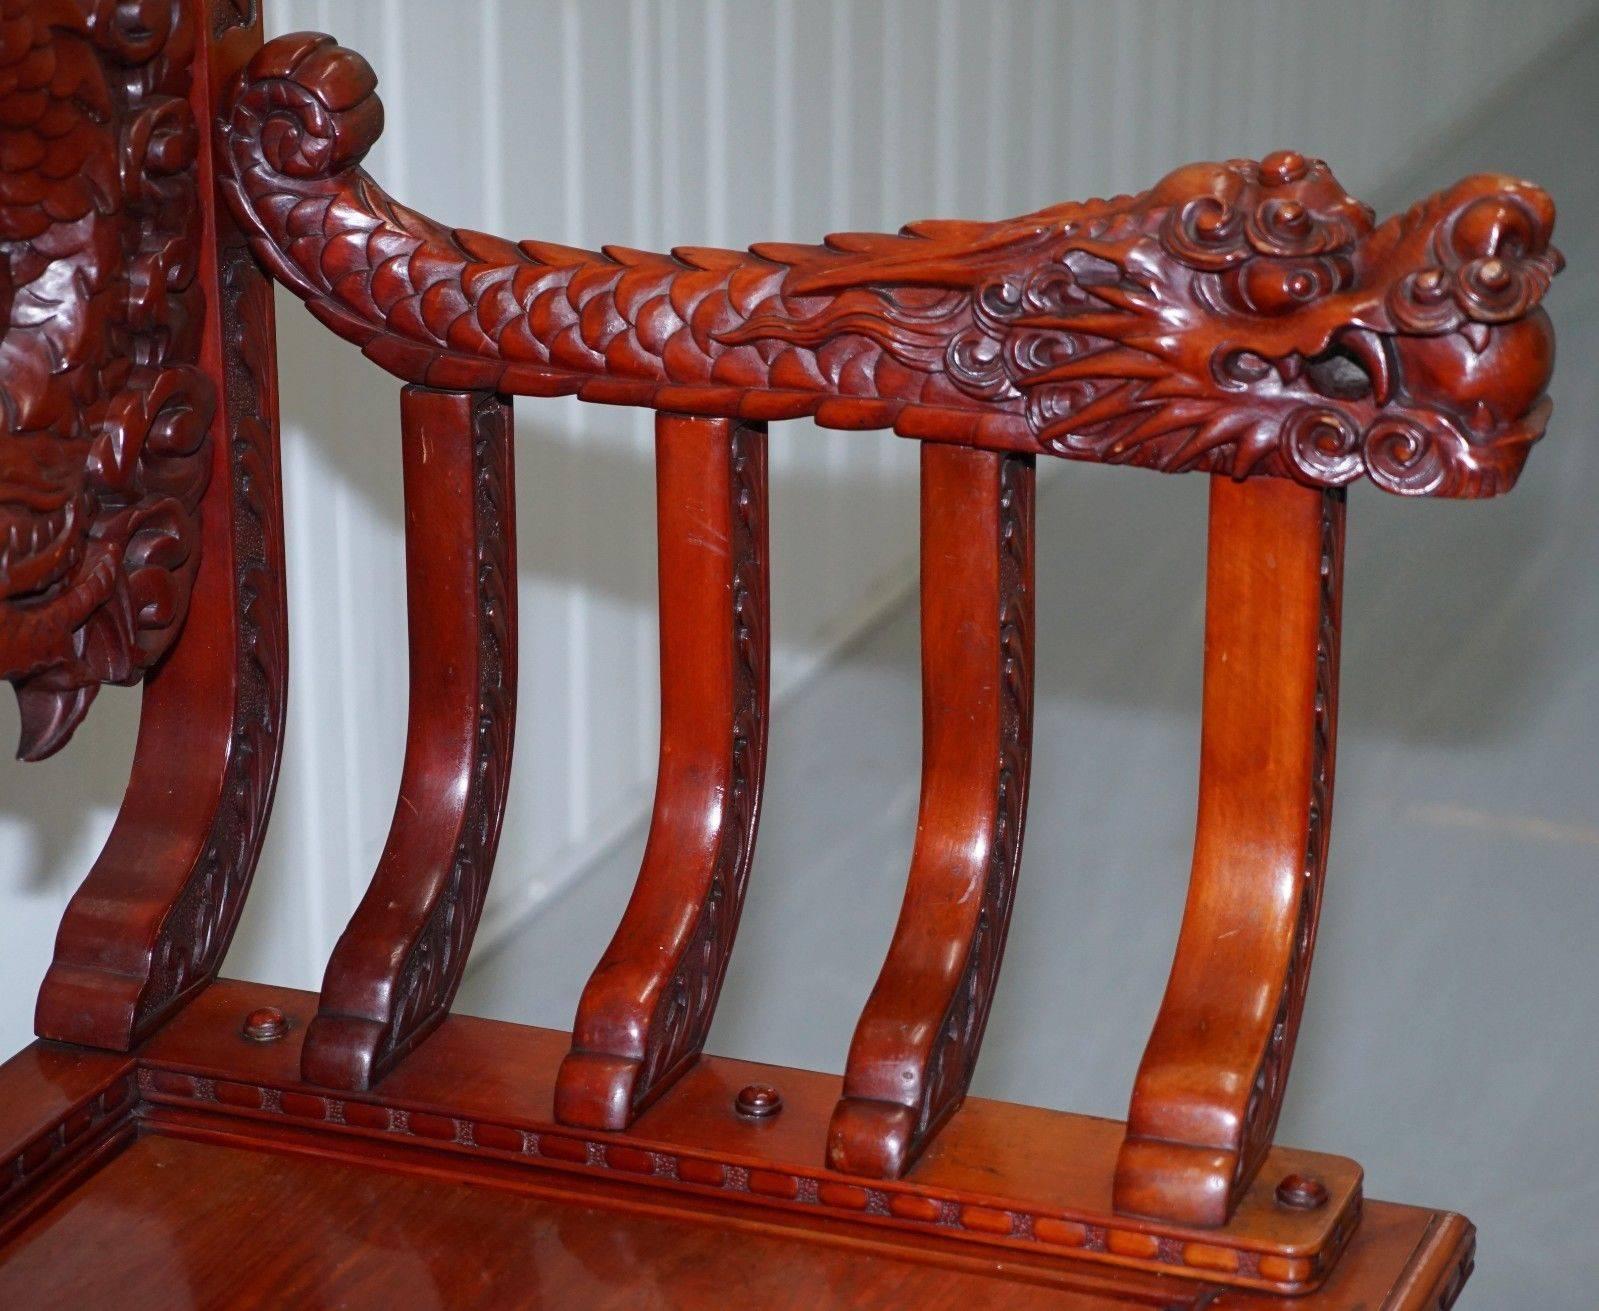 Hand-Carved Rare Chinese Export Hand Carved Dragon Bench Chair Solid Teak Redwood circa 1890